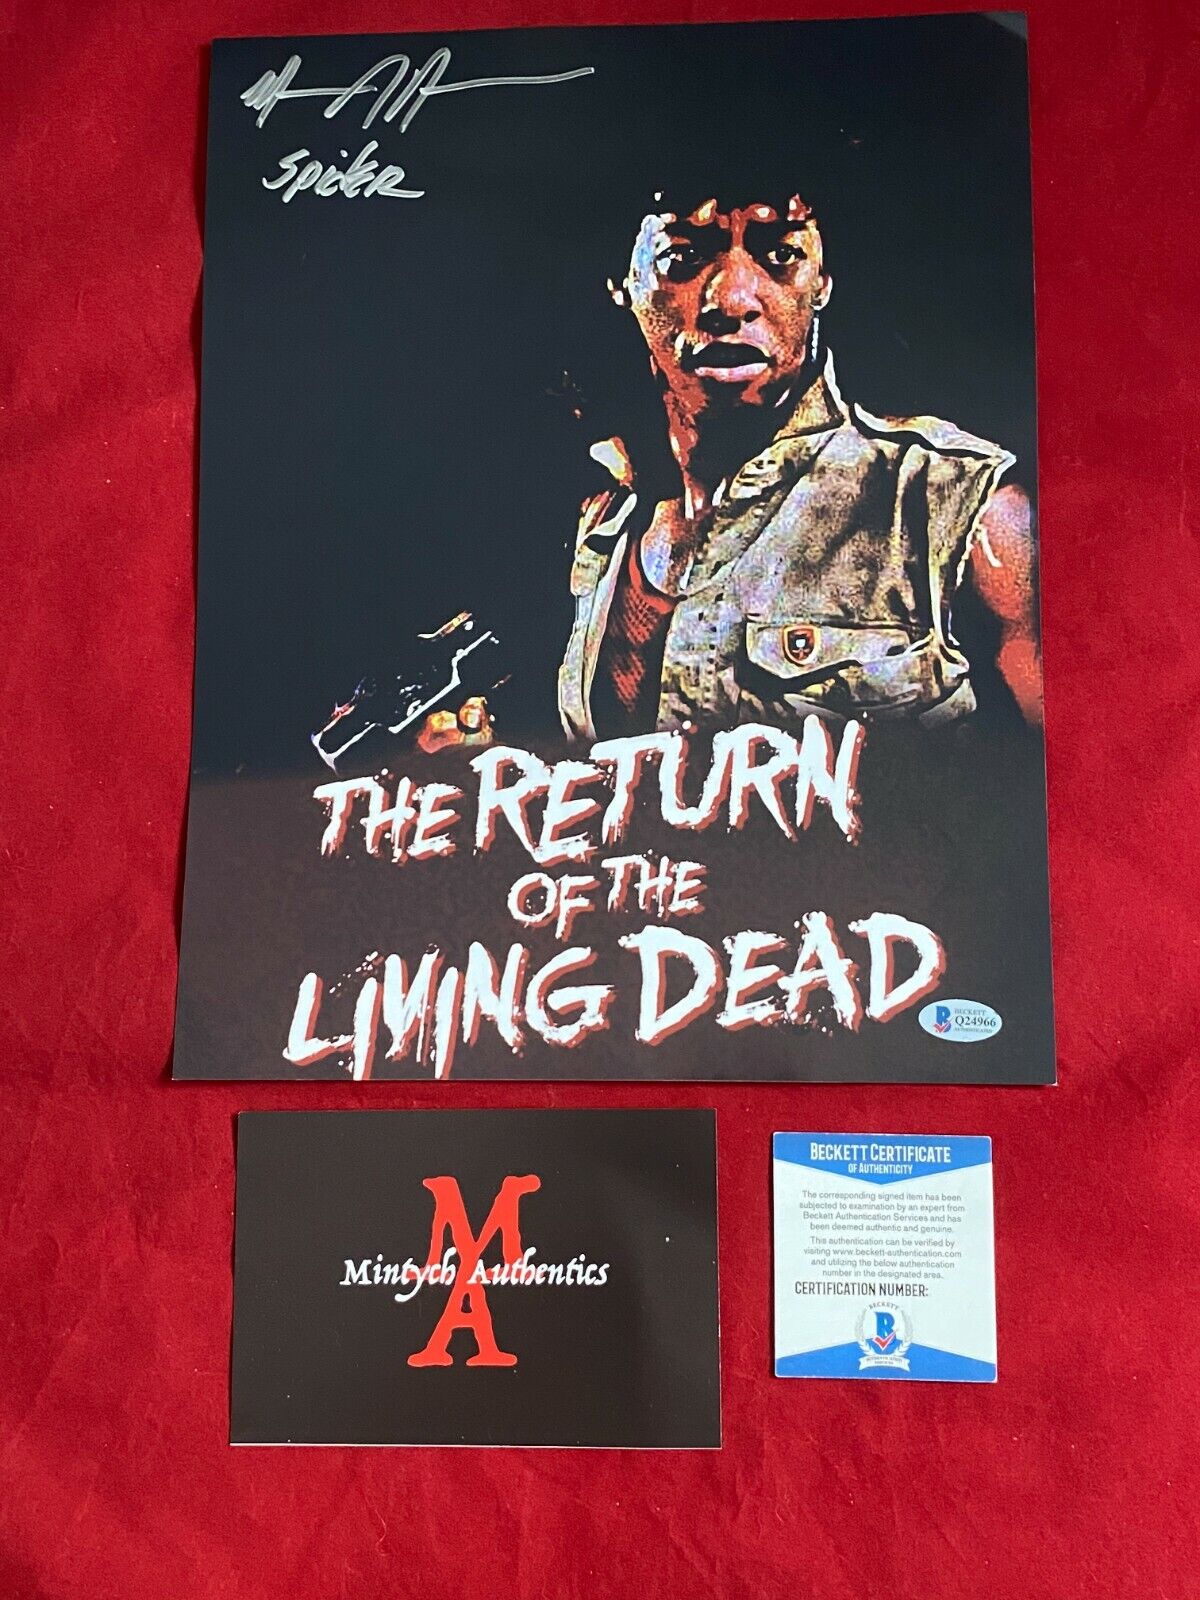 MIGUEL NUNEZ AUTOGRAPHED SIGNED 11x14 Photo Poster painting! RETURN OF THE LIVING DEAD! BECKETT